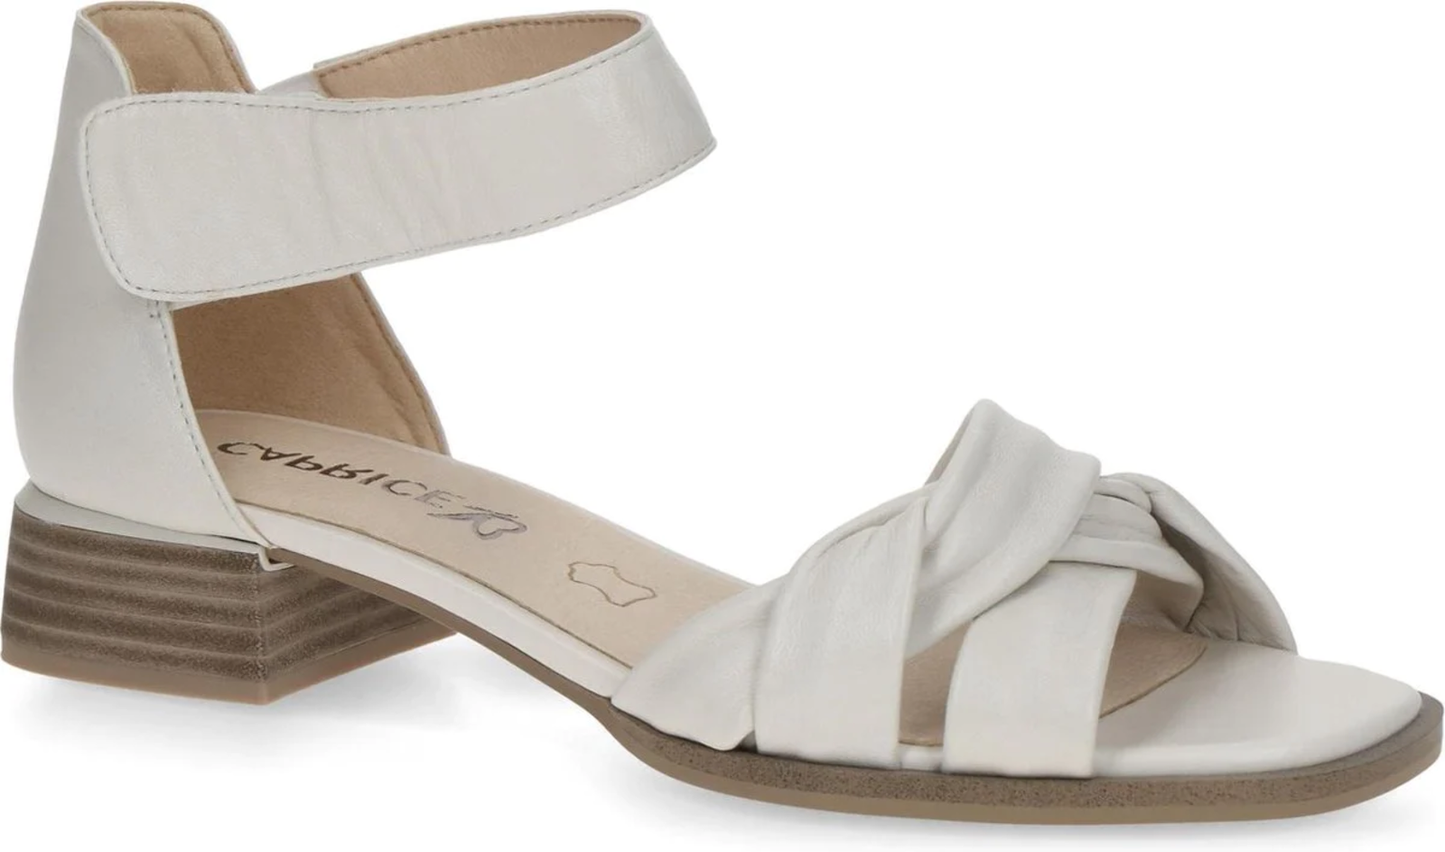 Caprice Off White Soft Leather Low Heel Sandal. Only sizes 3.5 left.